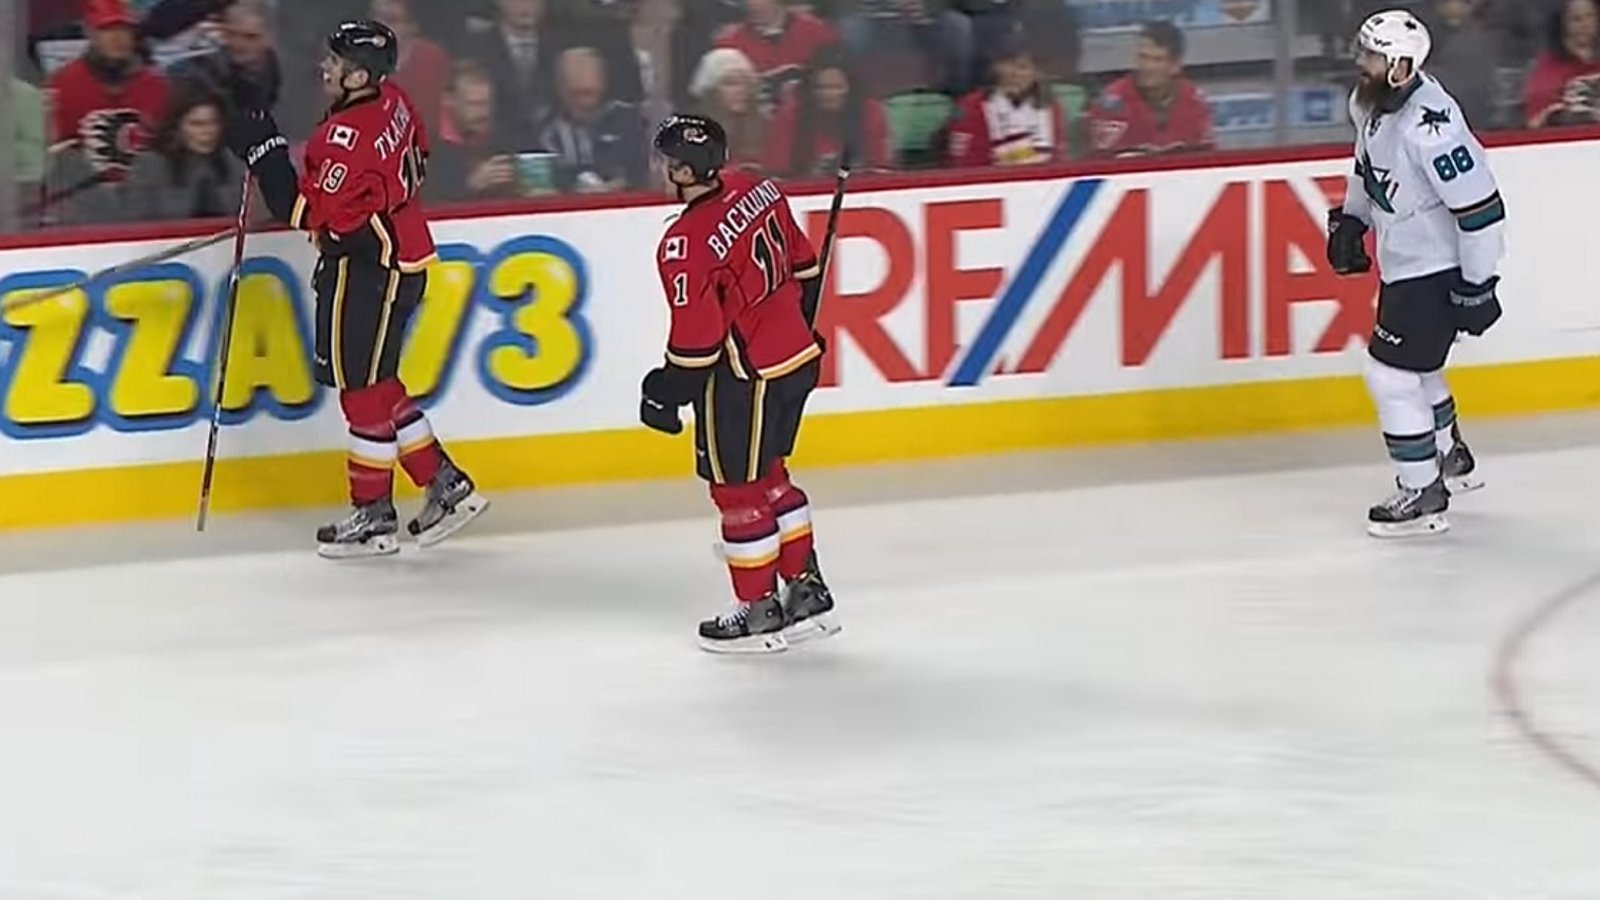 Rookie Tkachuk steals Brent Burns' stick and refuses to give it back!